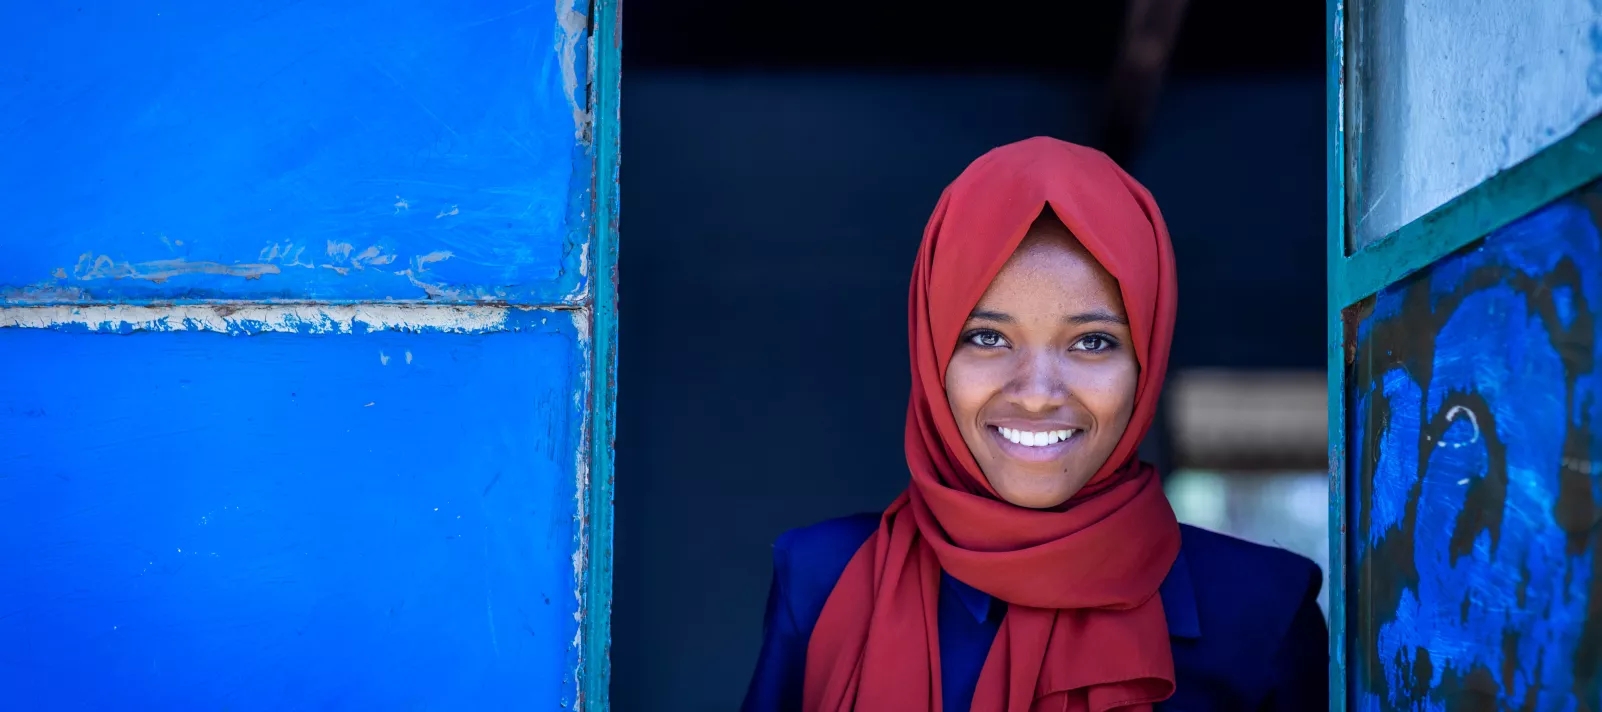 A girl in an orange headscarf smiles as she leans out of a window